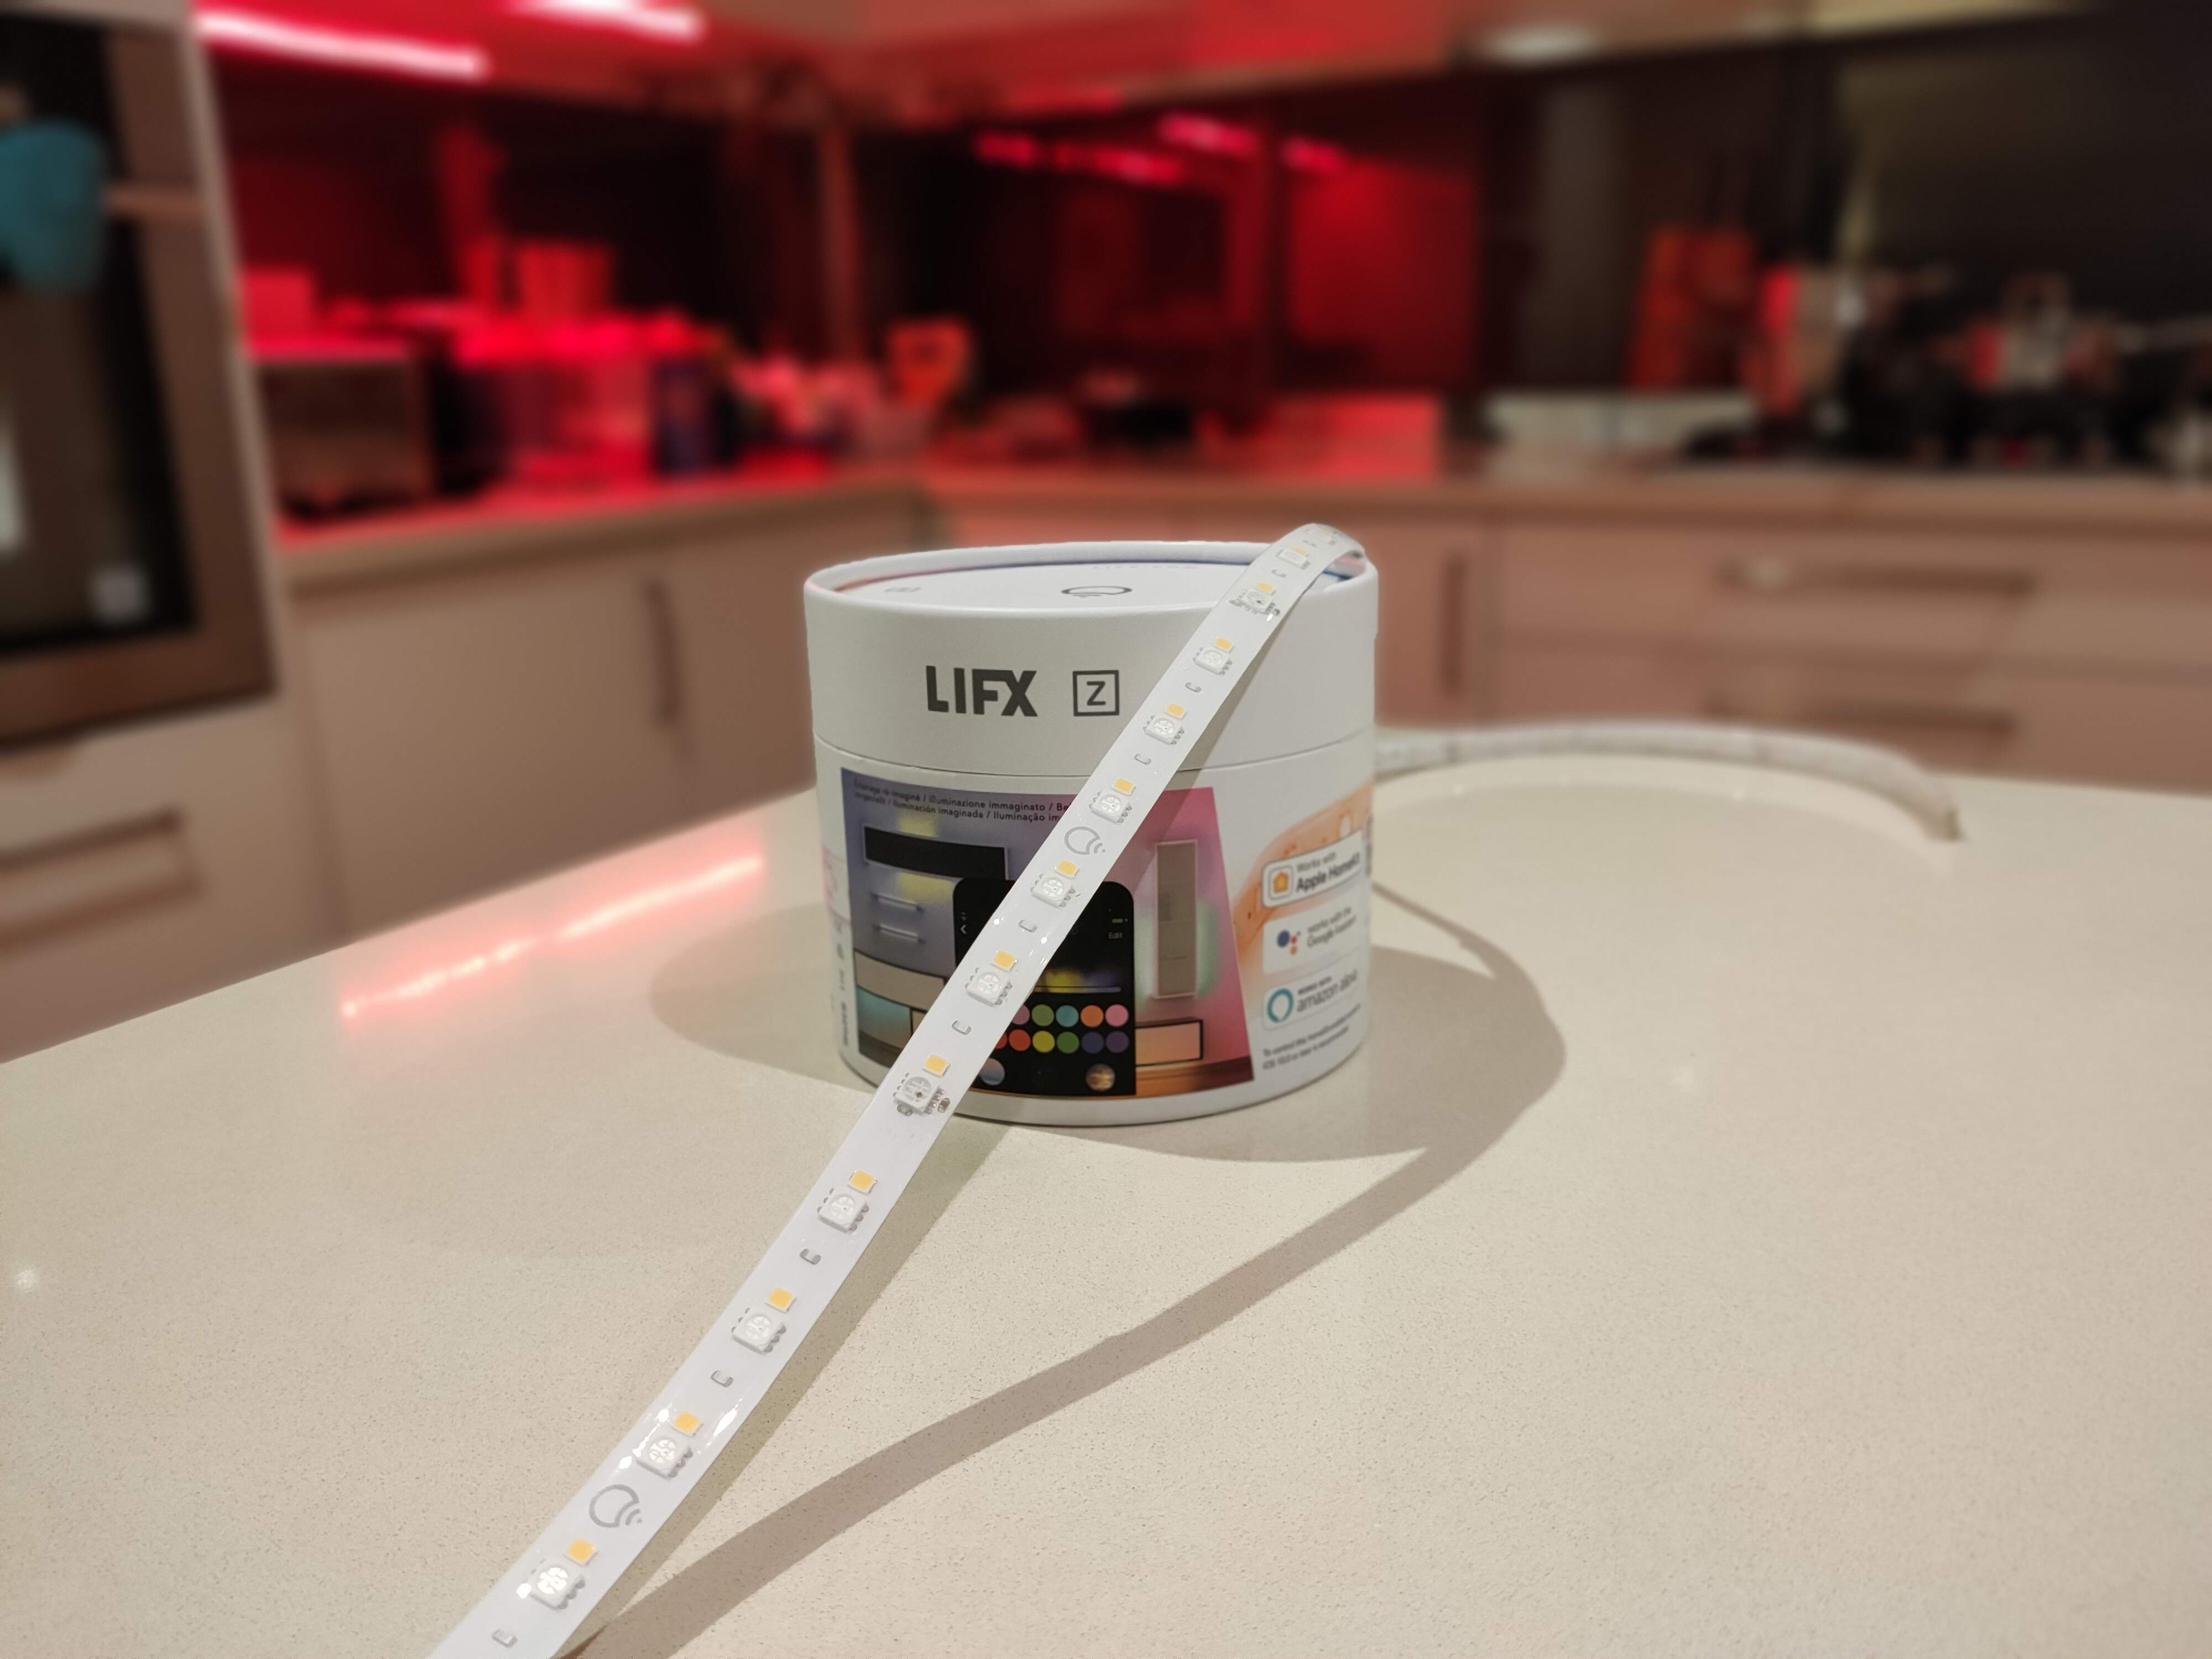 Lifx Z Led Strip Lights Add Some Easy Strip Lighting To Your Smart Home Ausdroid